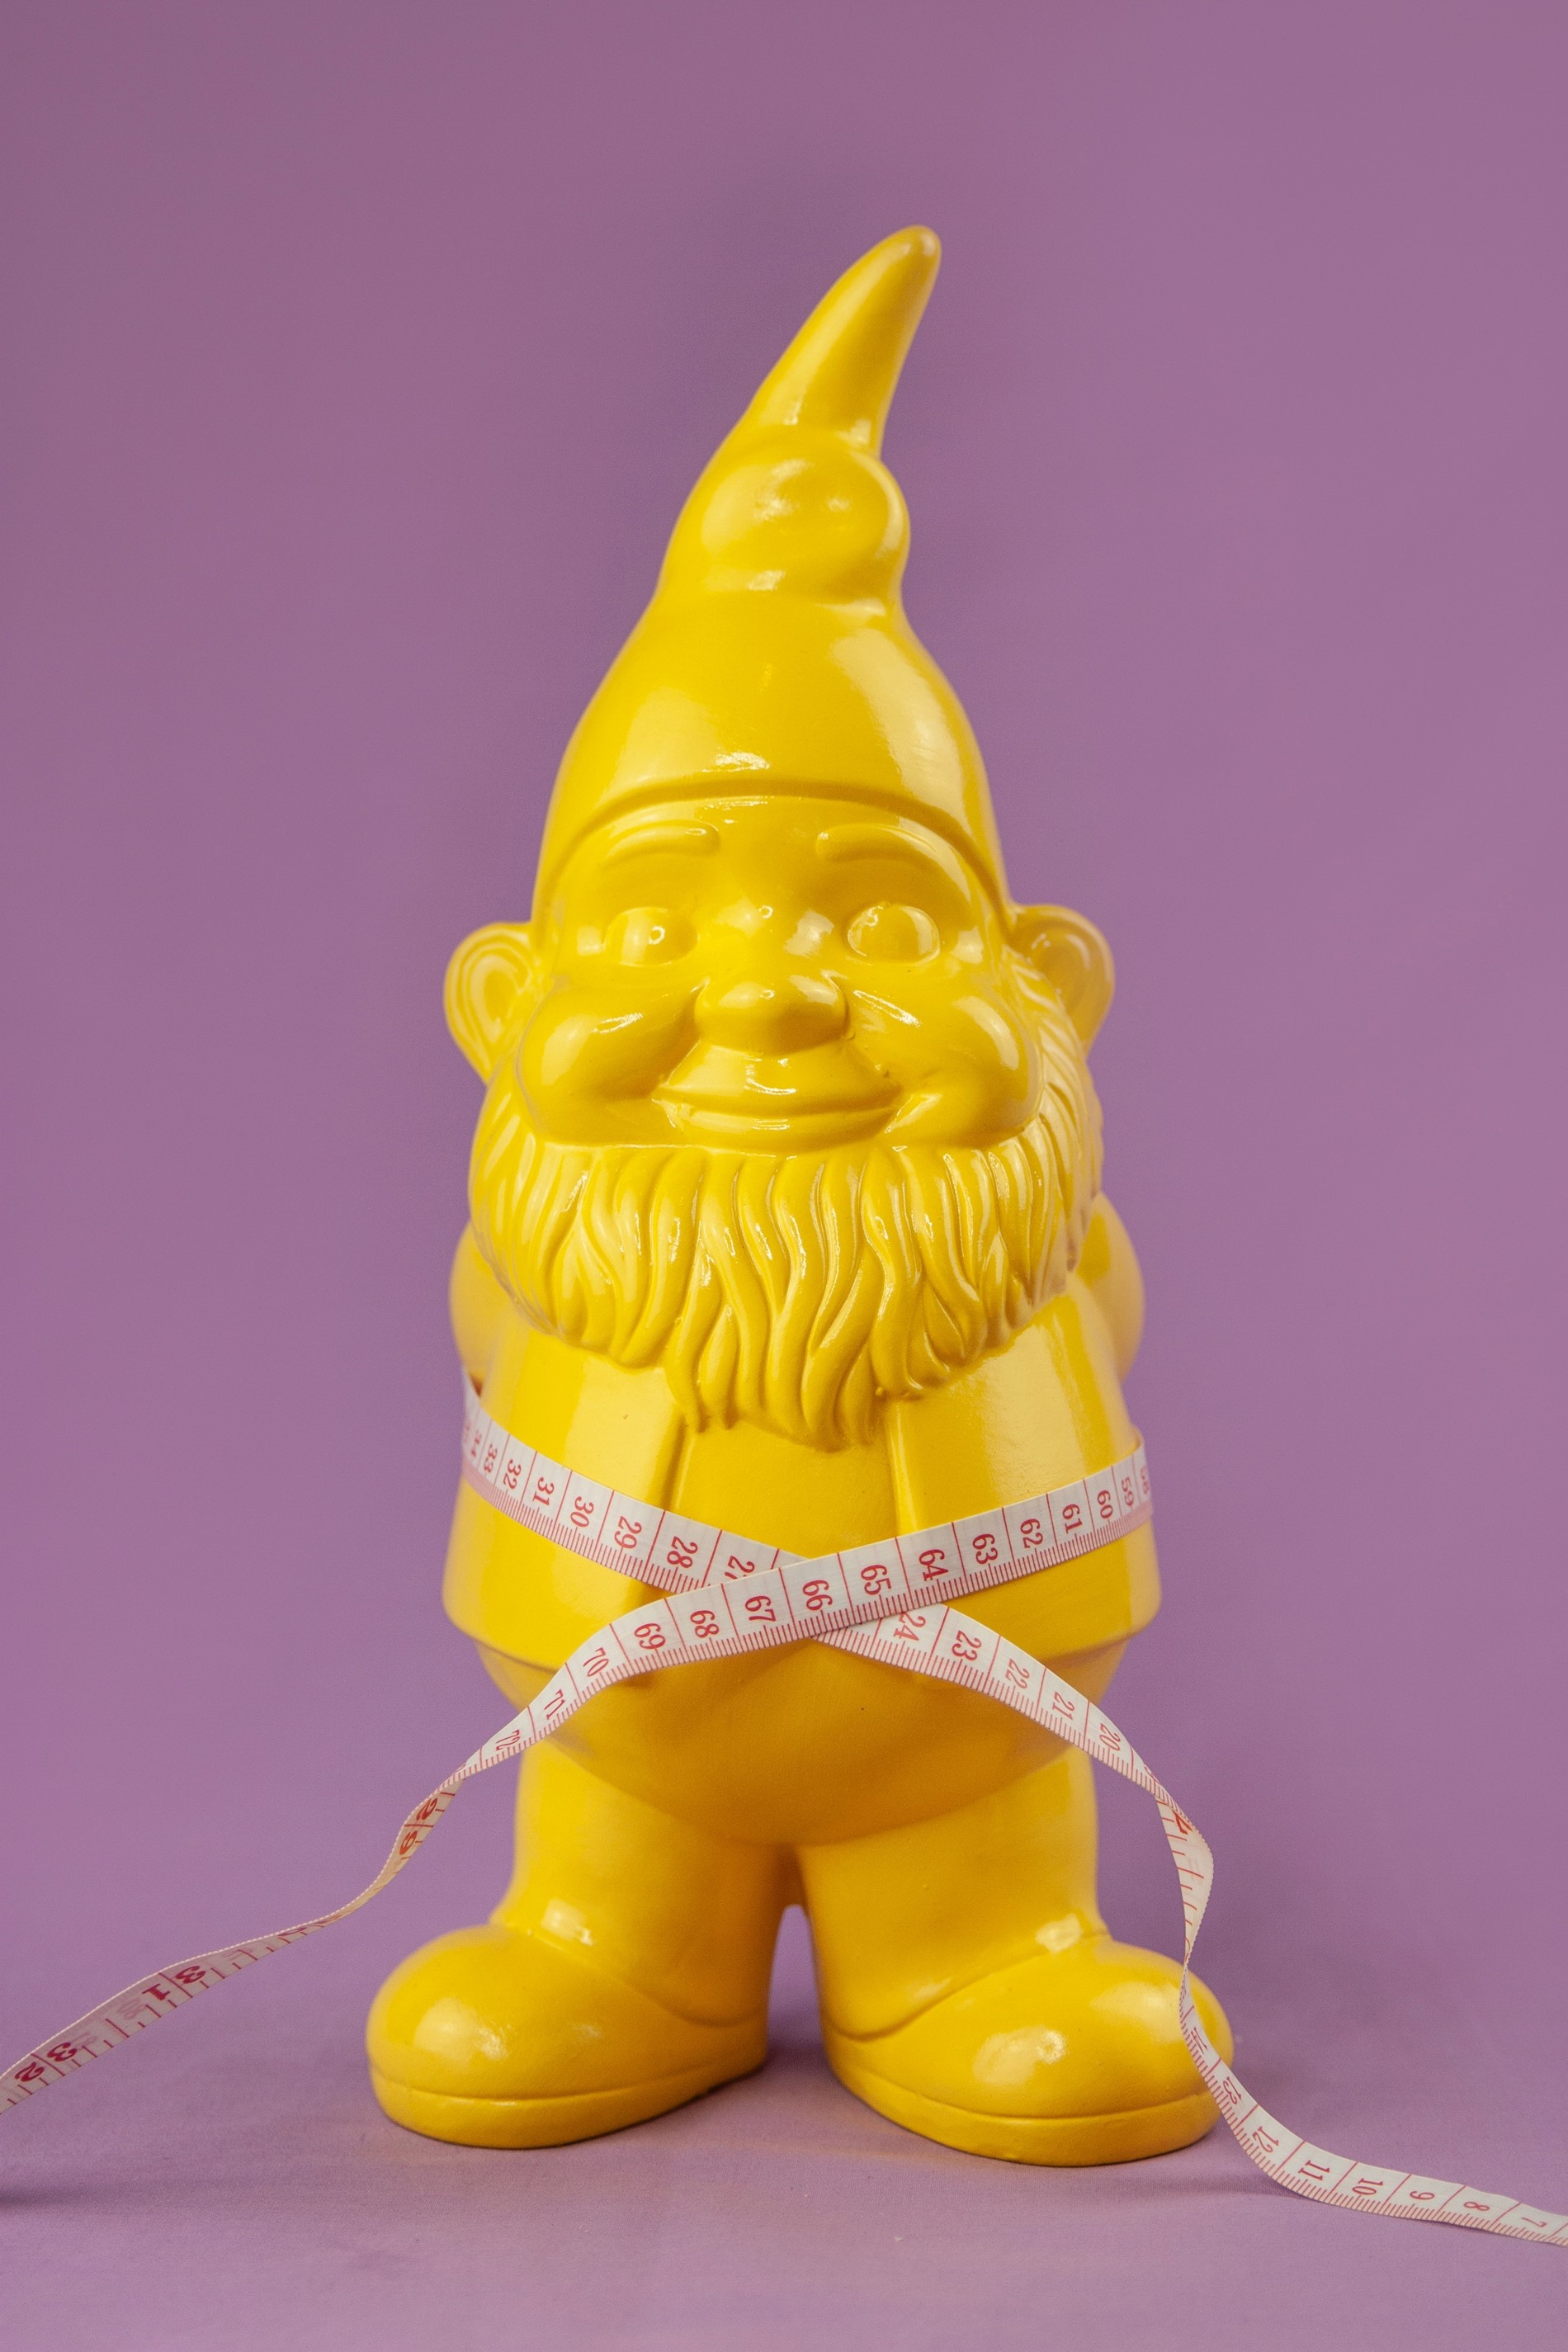 A gnome with measuring tape around it